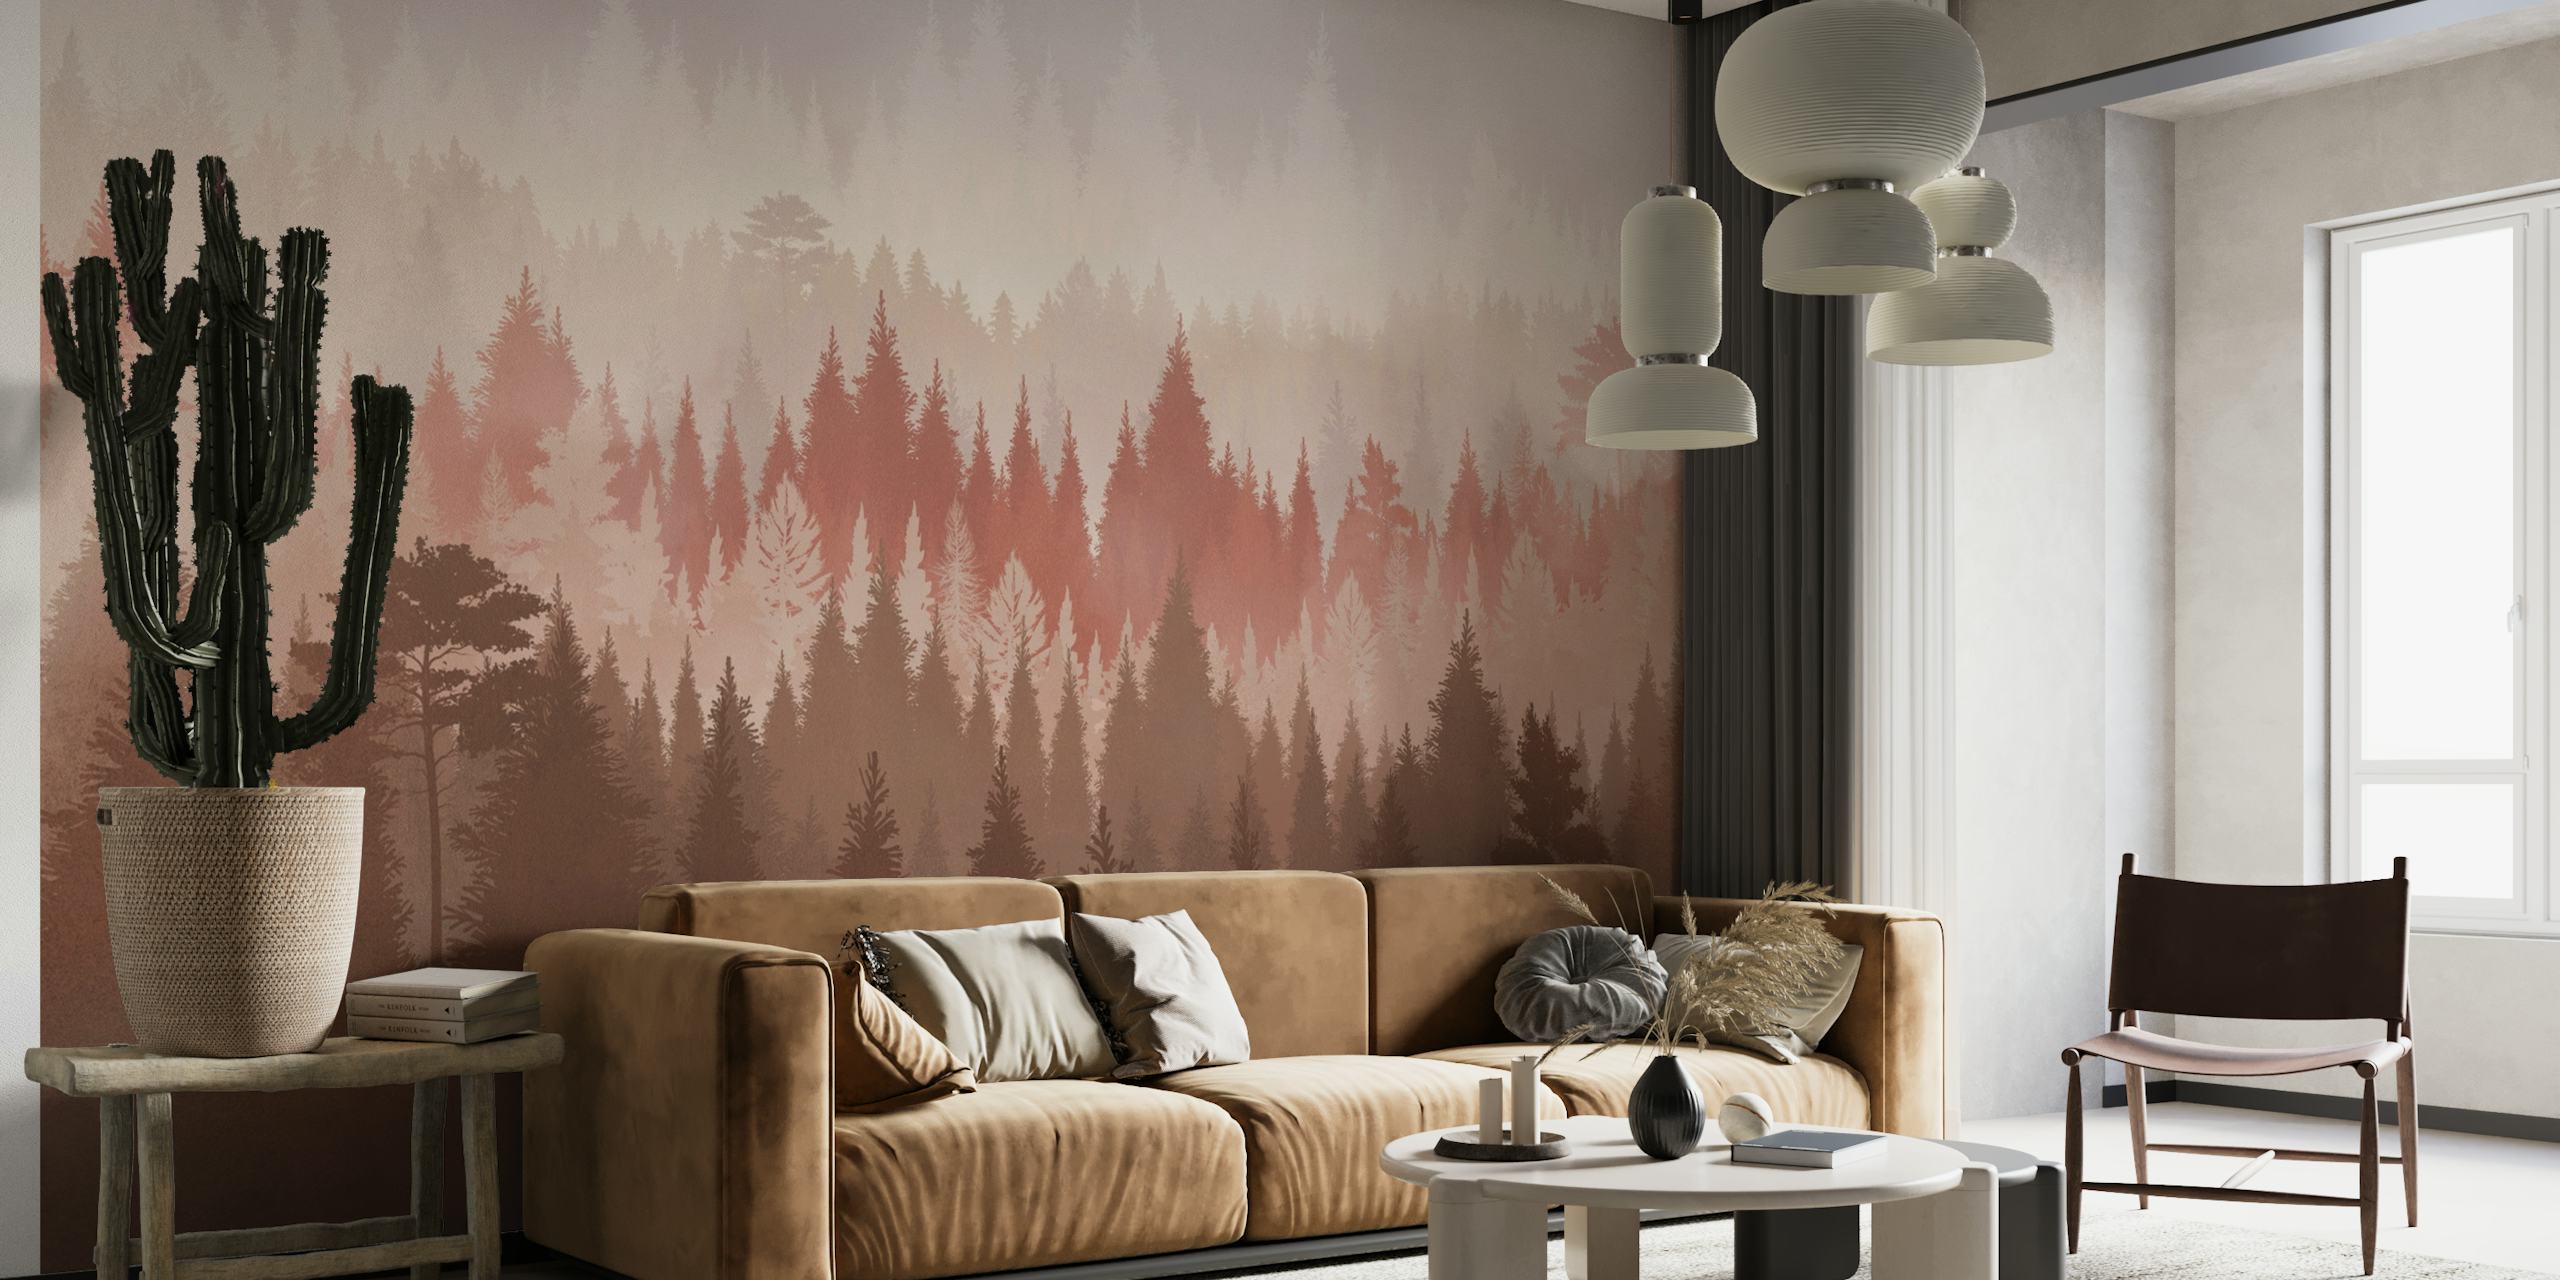 Abstract geometric forest wall mural in earthy tones